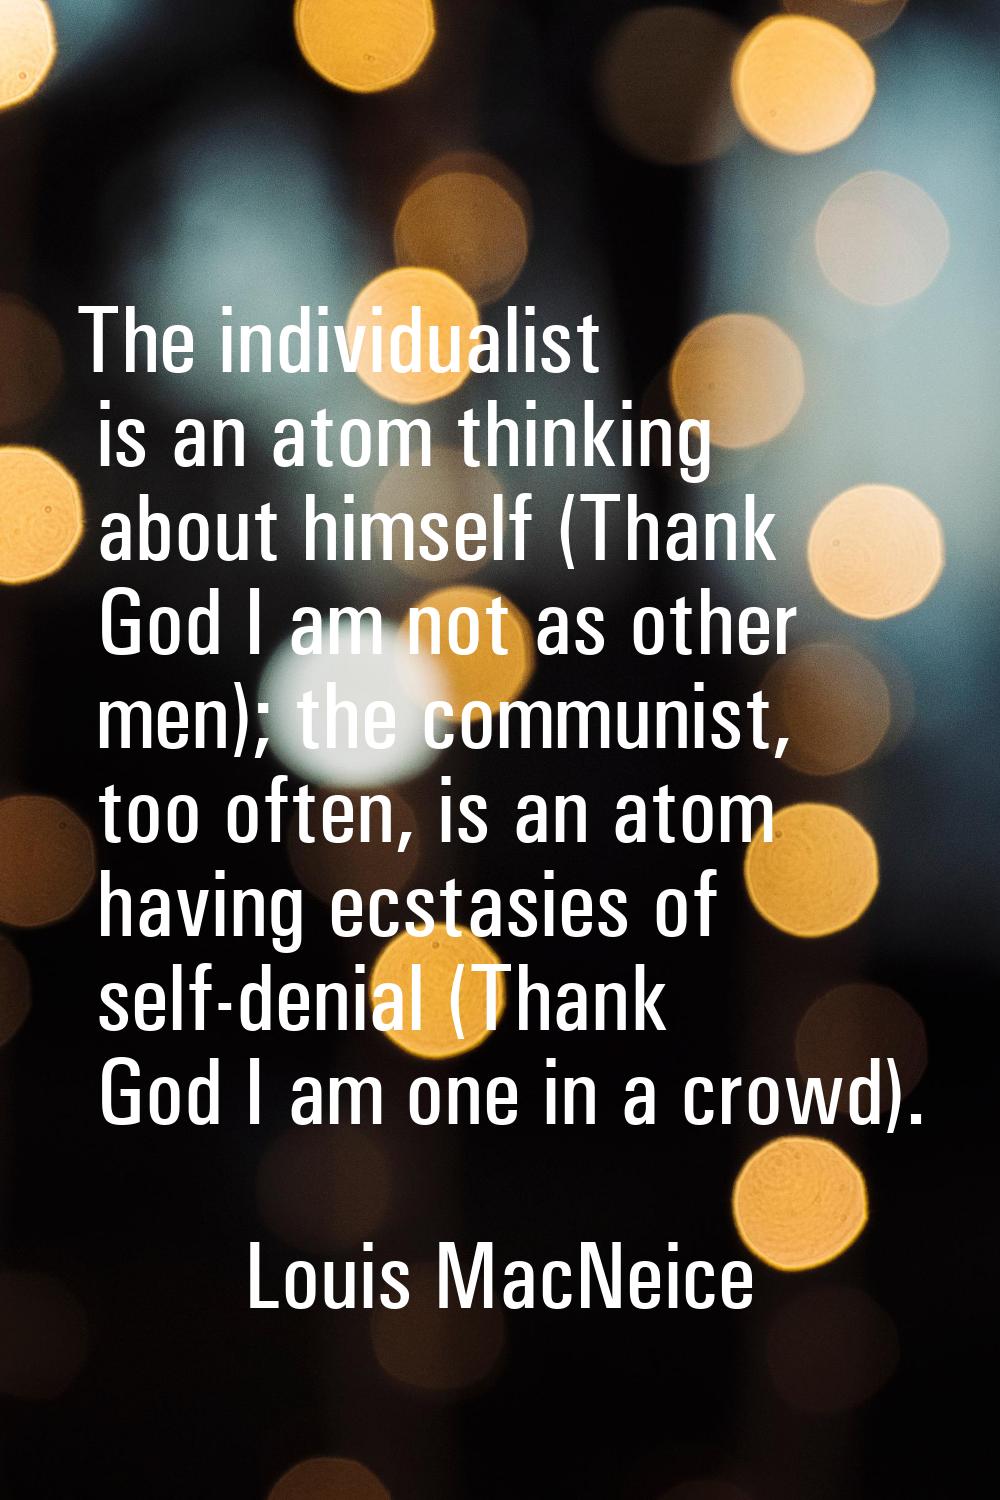 The individualist is an atom thinking about himself (Thank God I am not as other men); the communis